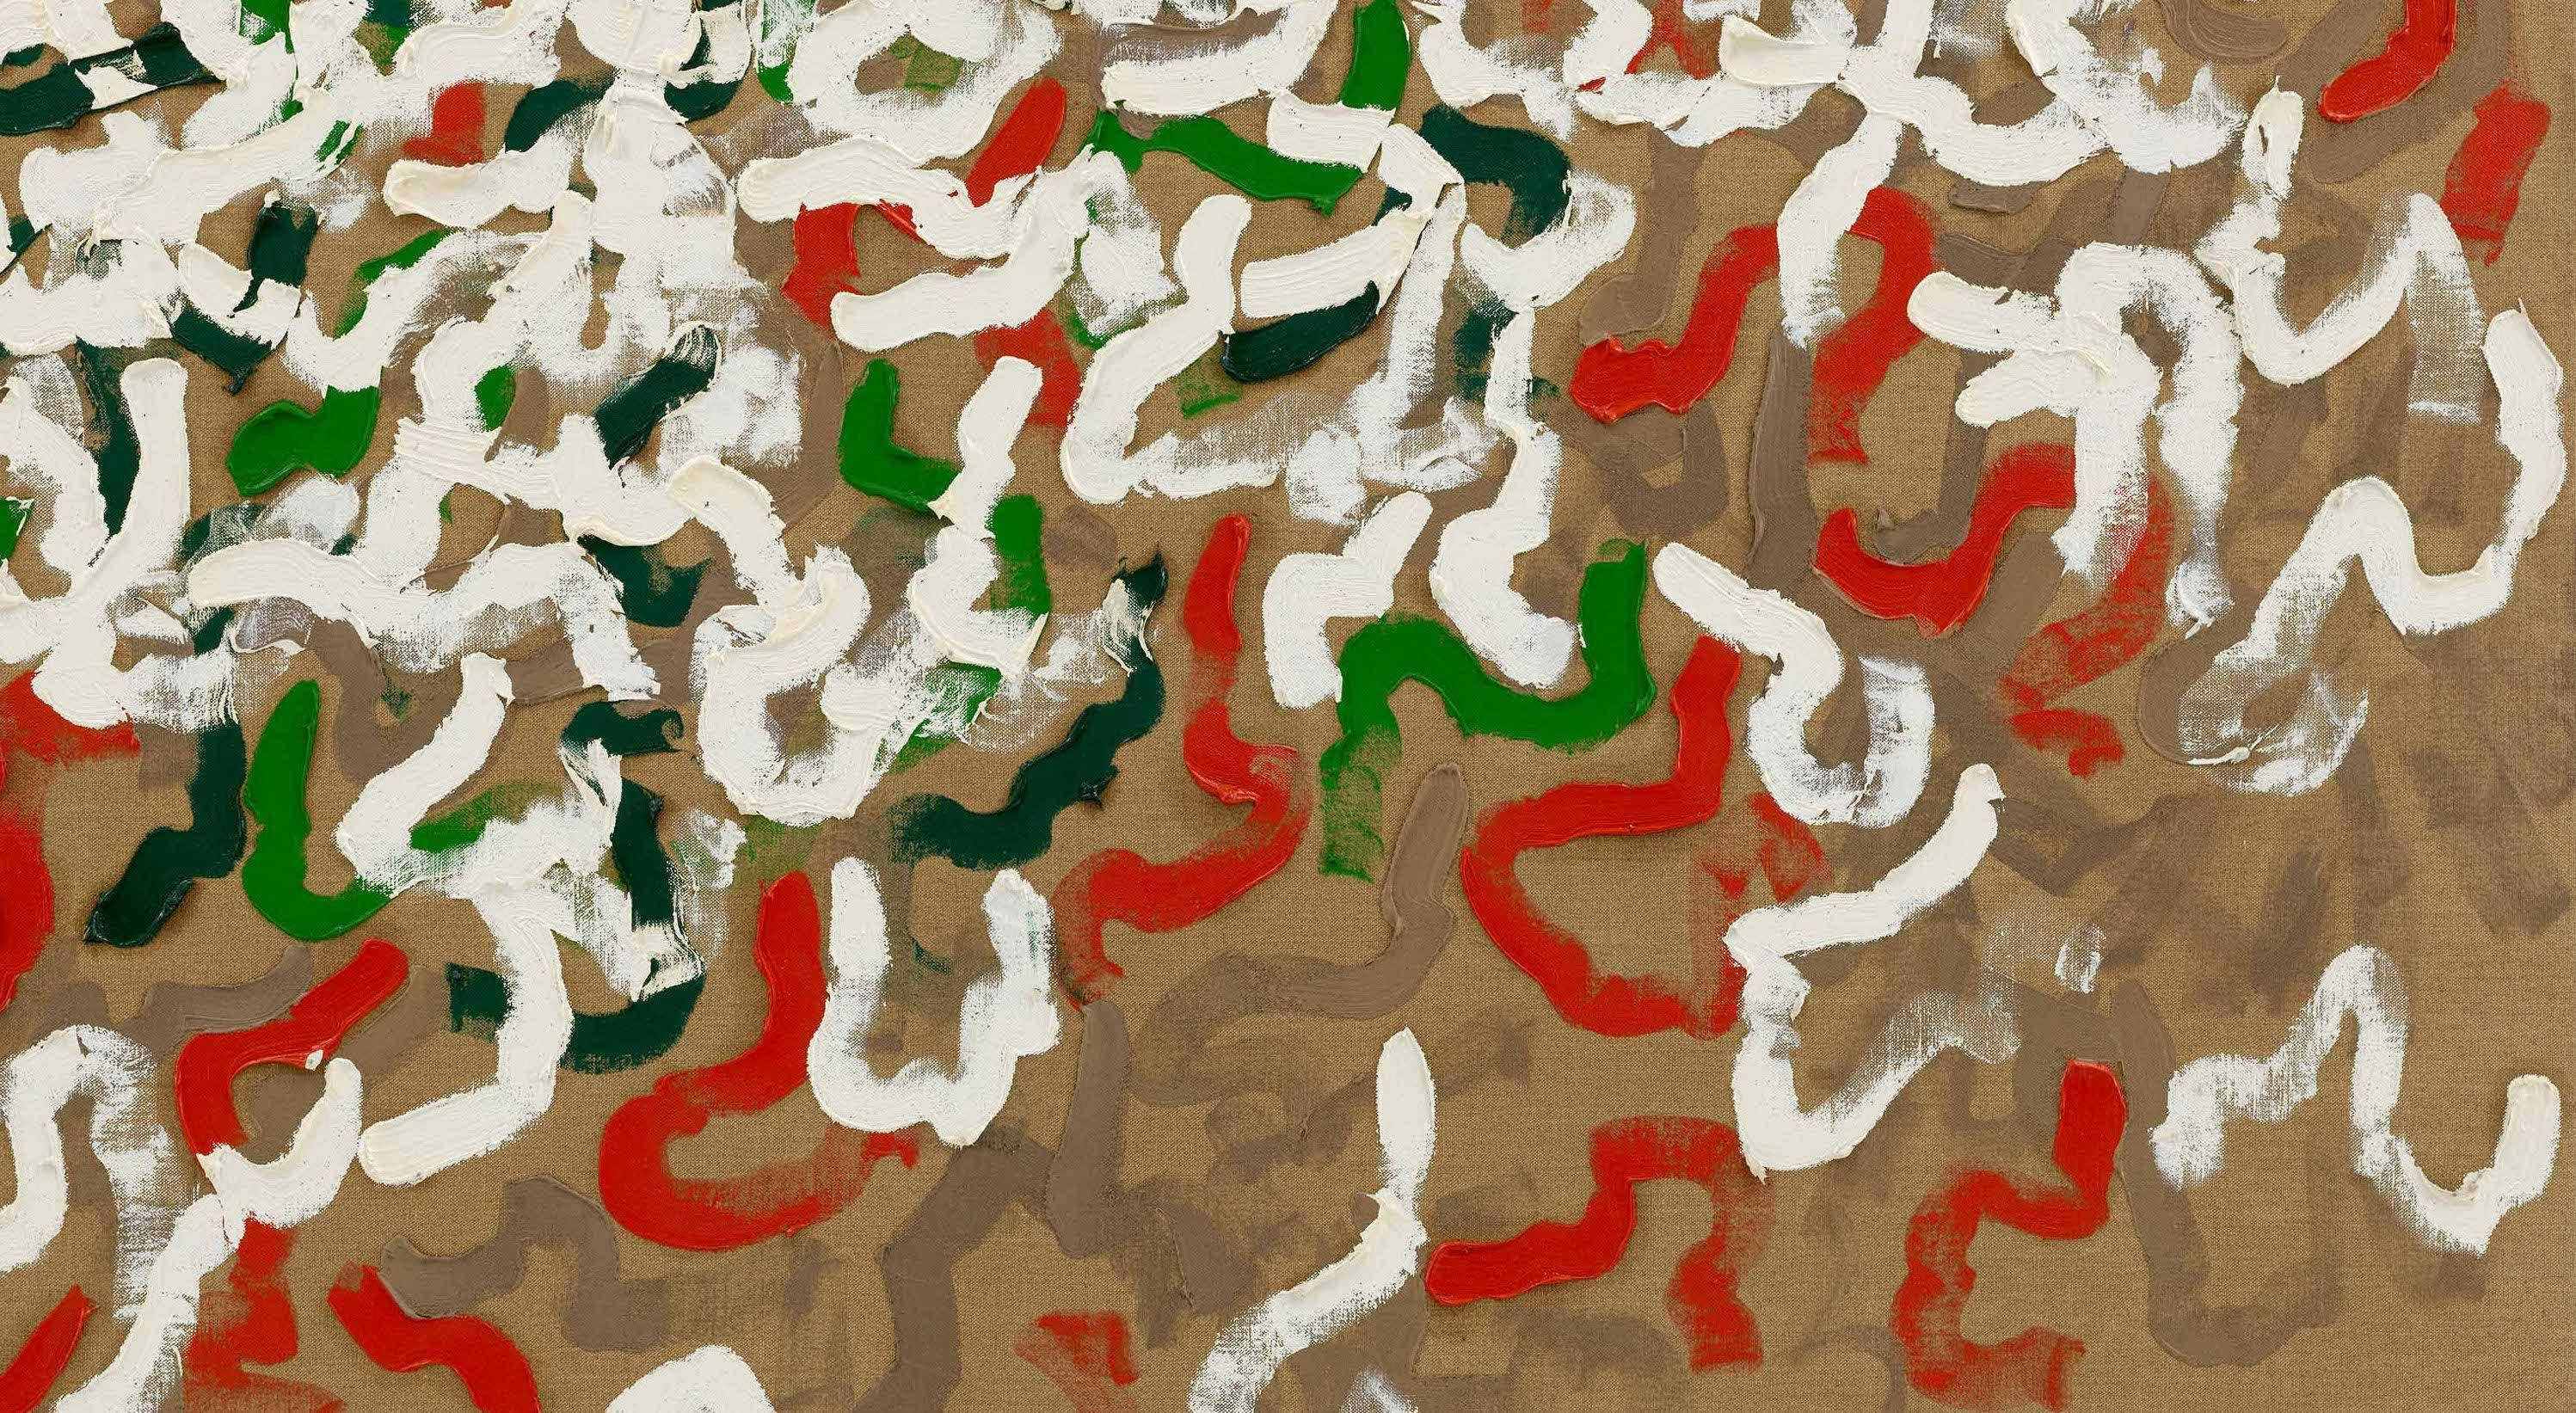 A detail from a painting by Robert Ryman, called untitled, dated circa1963.